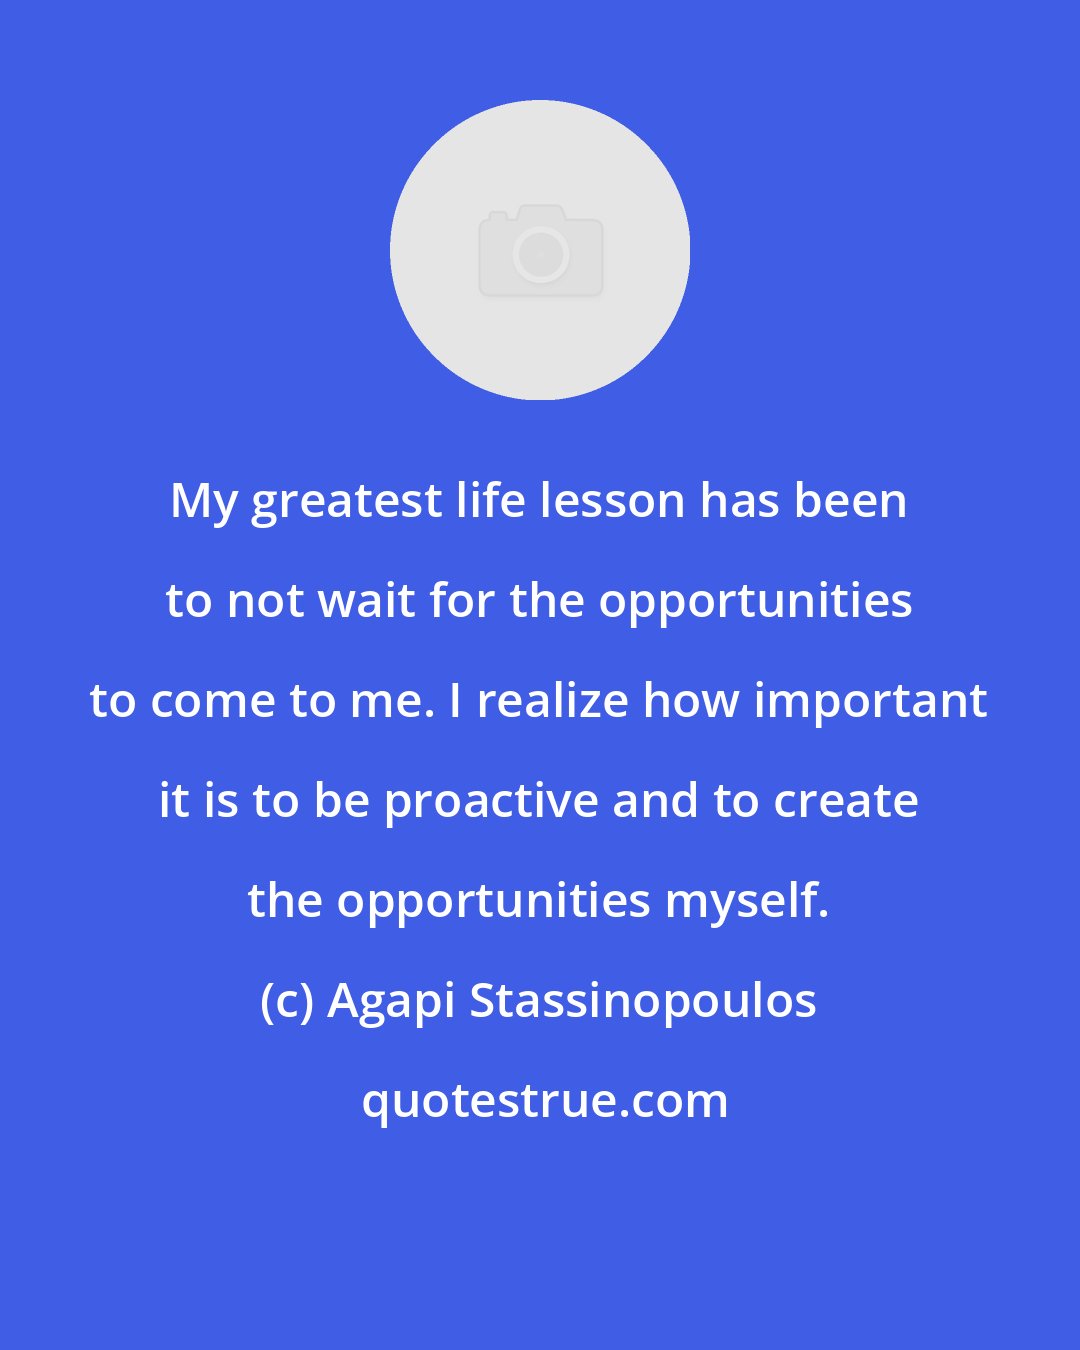 Agapi Stassinopoulos: My greatest life lesson has been to not wait for the opportunities to come to me. I realize how important it is to be proactive and to create the opportunities myself.